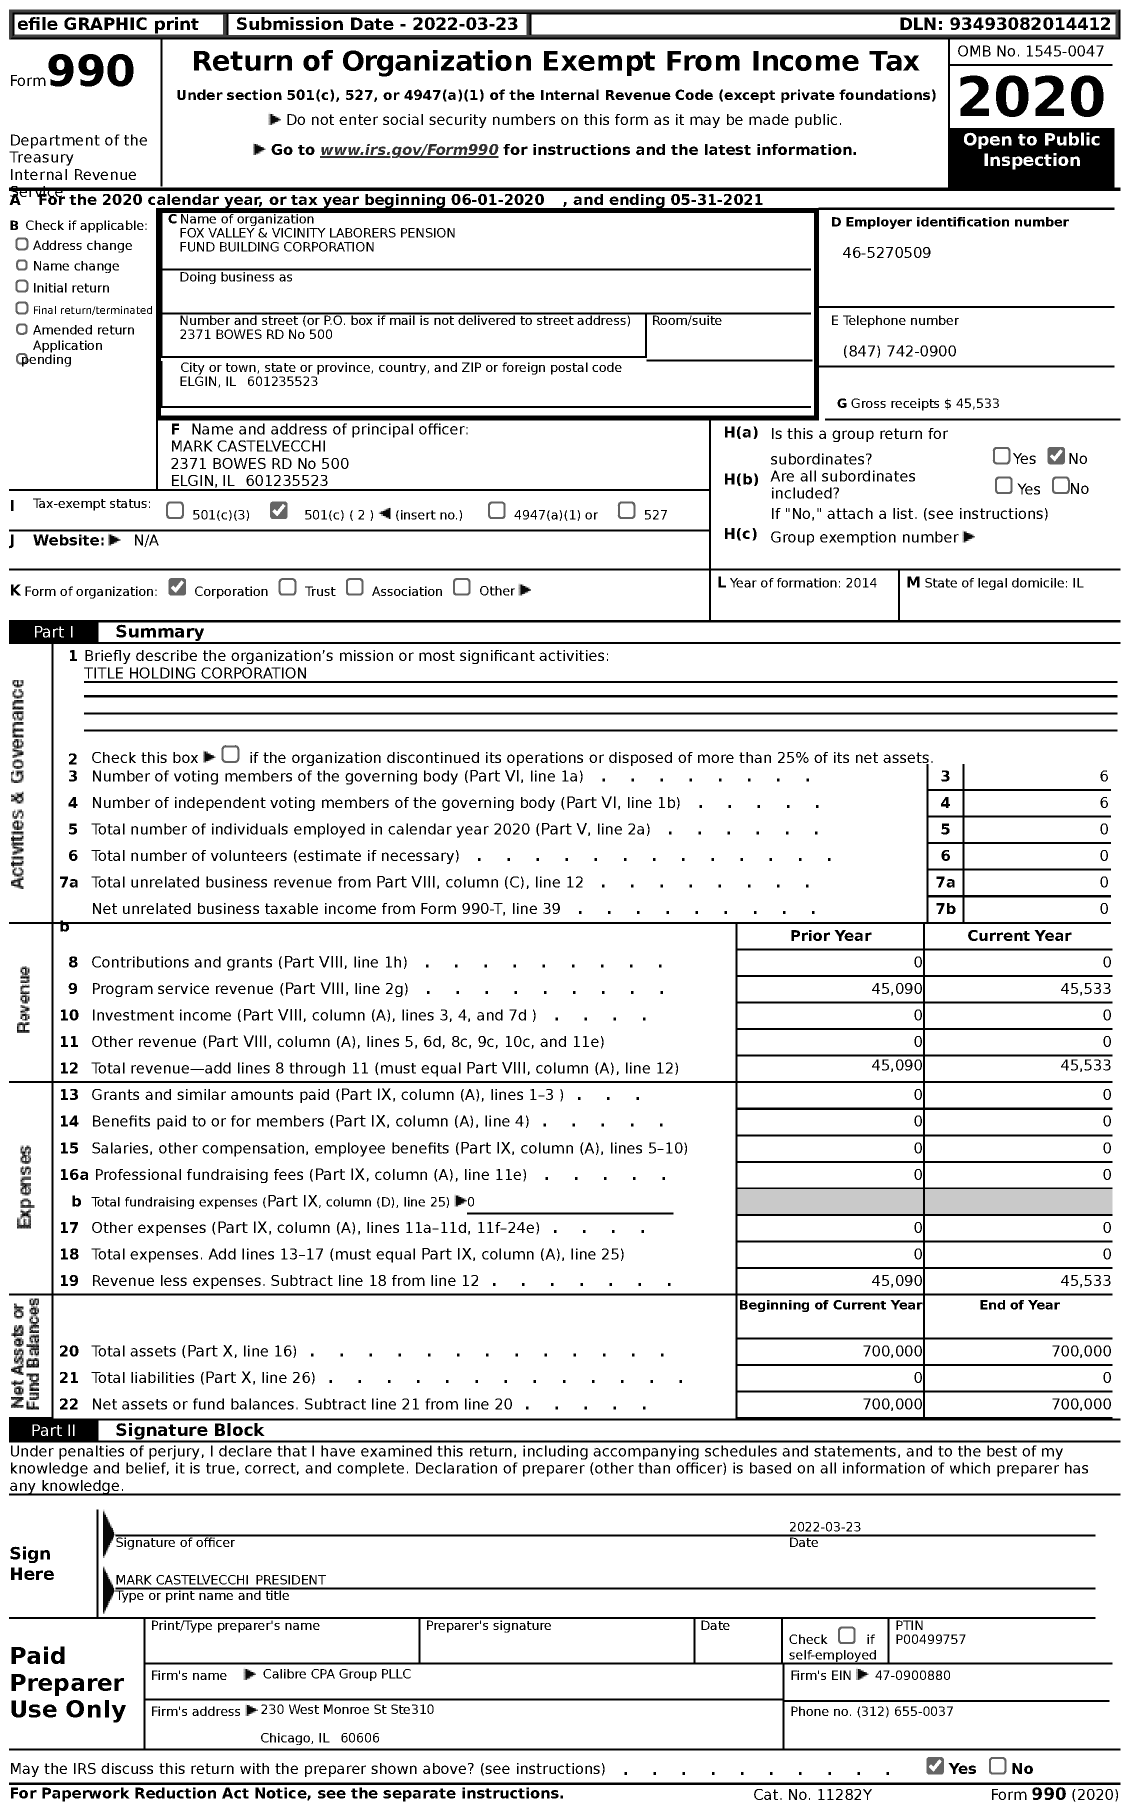 Image of first page of 2020 Form 990 for Fox Valley and Vicinity Laborers Pension Fund Building Corporation